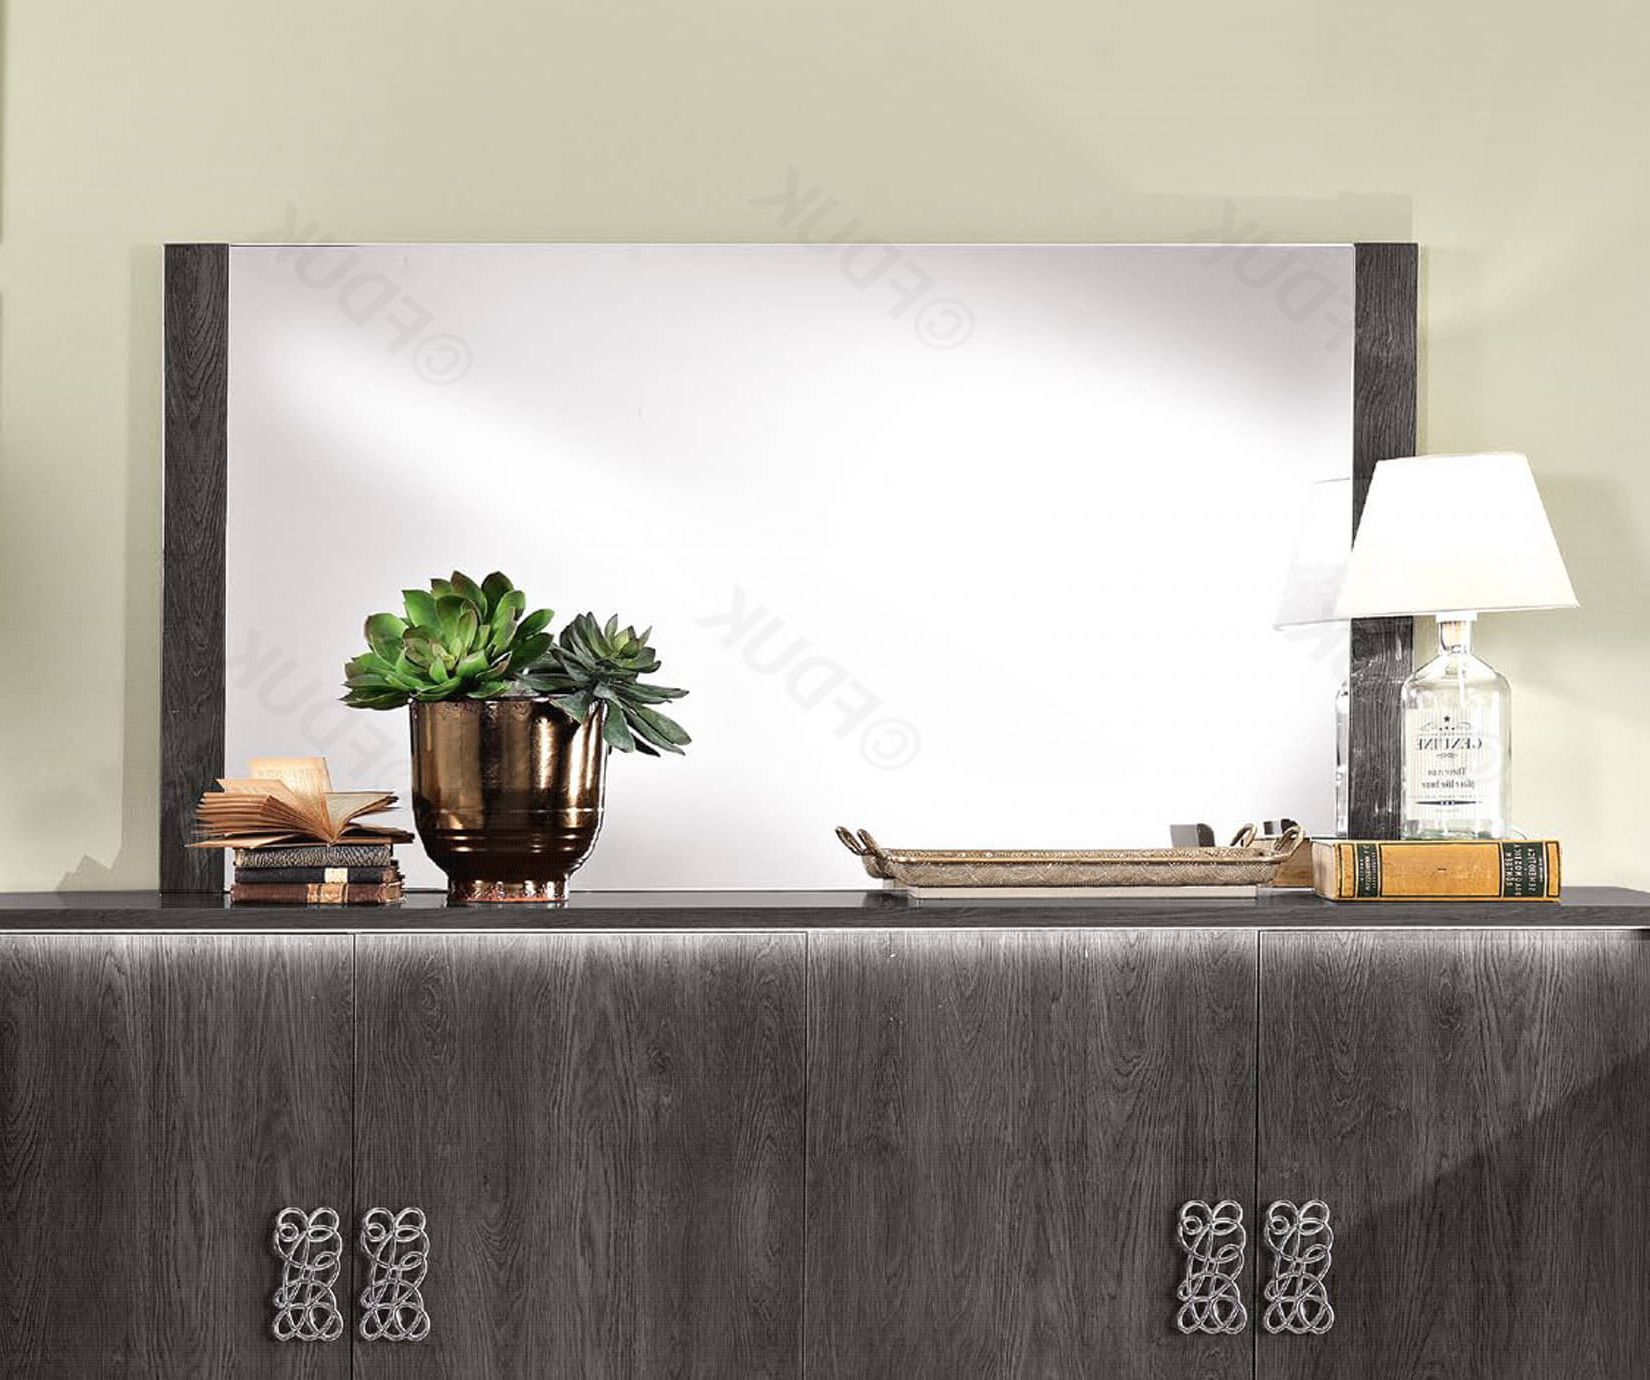 Mcs Dover Grey Finish Large Wall Mirror Fduk Best Price Guarantee We Will  Beat Our Competitors Price! Give Our Sales Team A Call On 0116 235 77 86  And Throughout Favorite Huge Wall Mirrors (View 16 of 20)